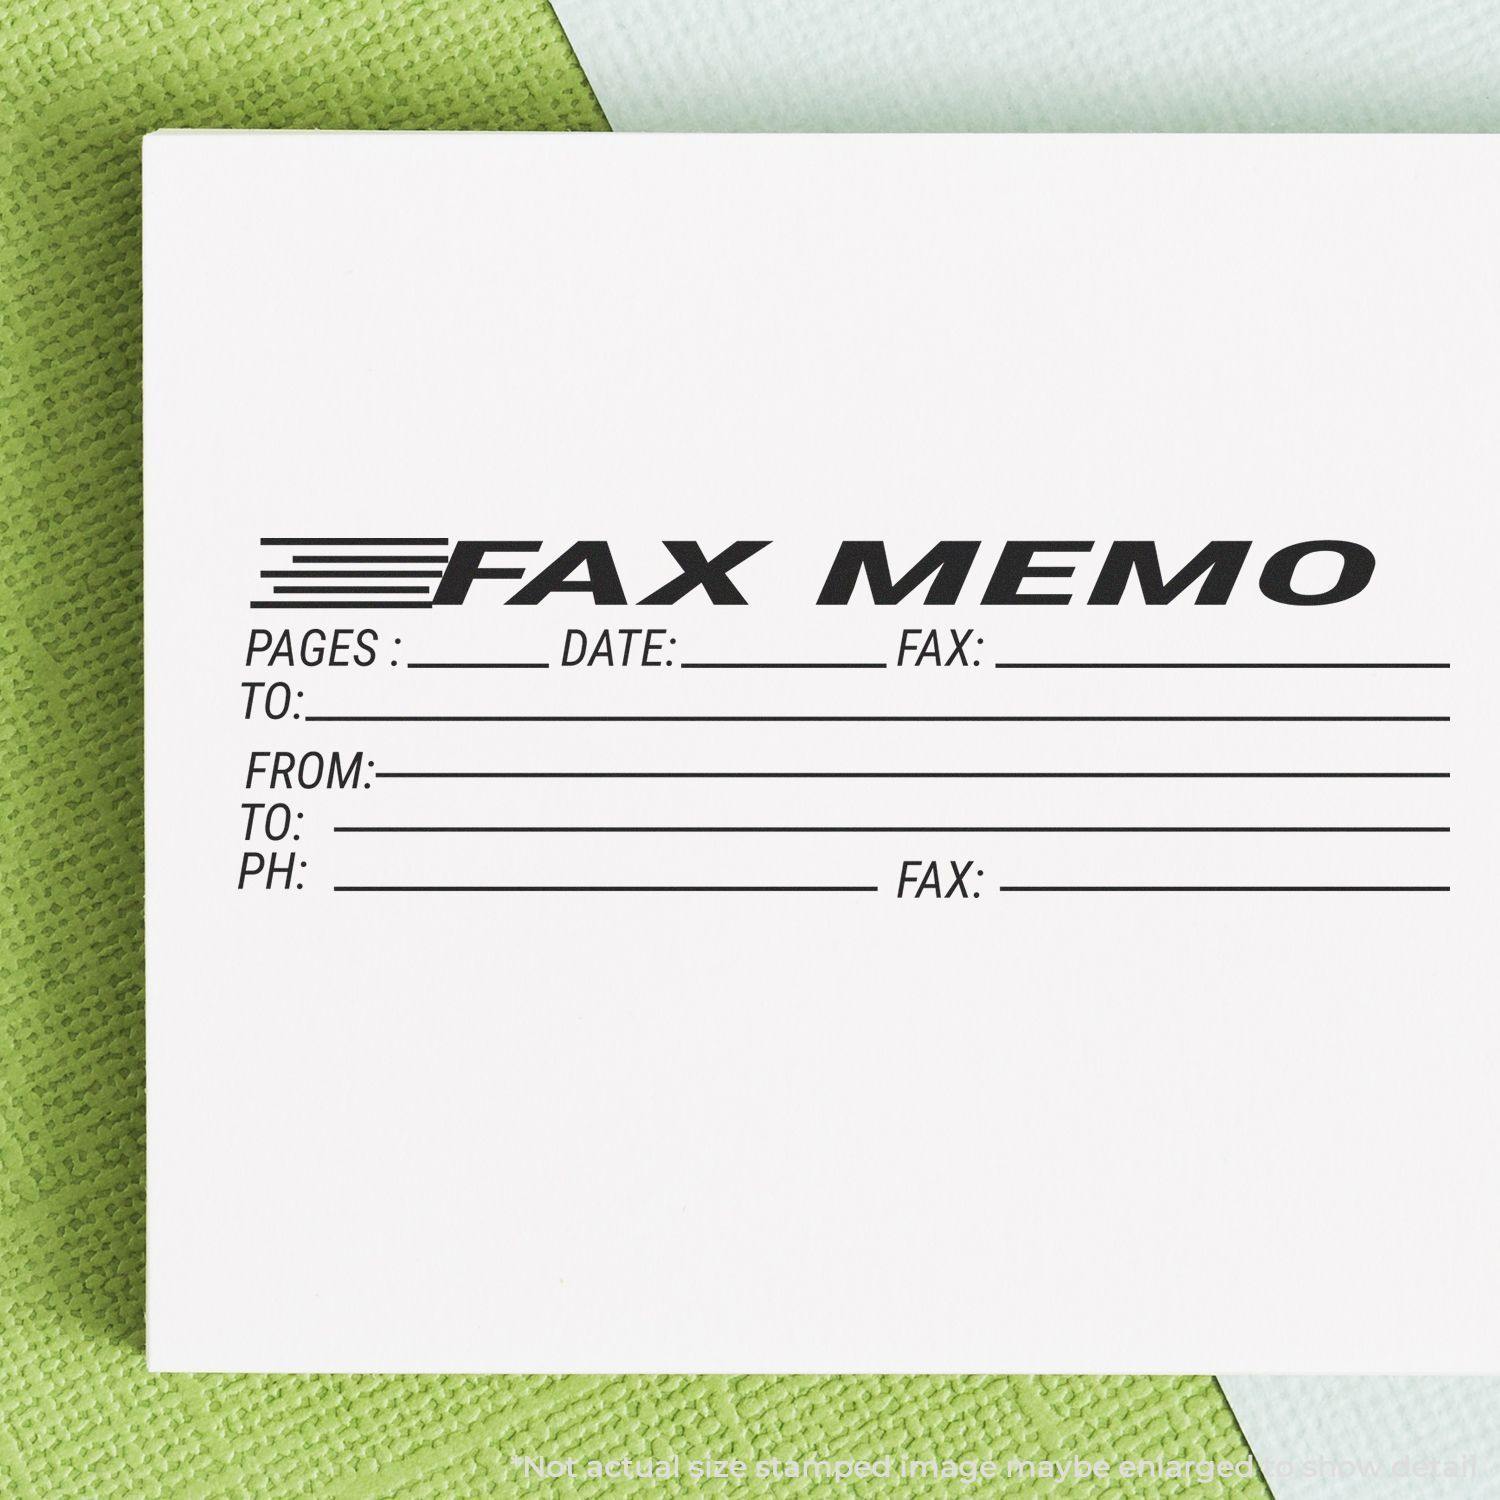 A self-inking stamp with a stamped image showing a heading that reads "FAX MMEMO" in italic font and underneath are spaces to indicate the number of pages, date, fax information, and who the fax is being sent to.